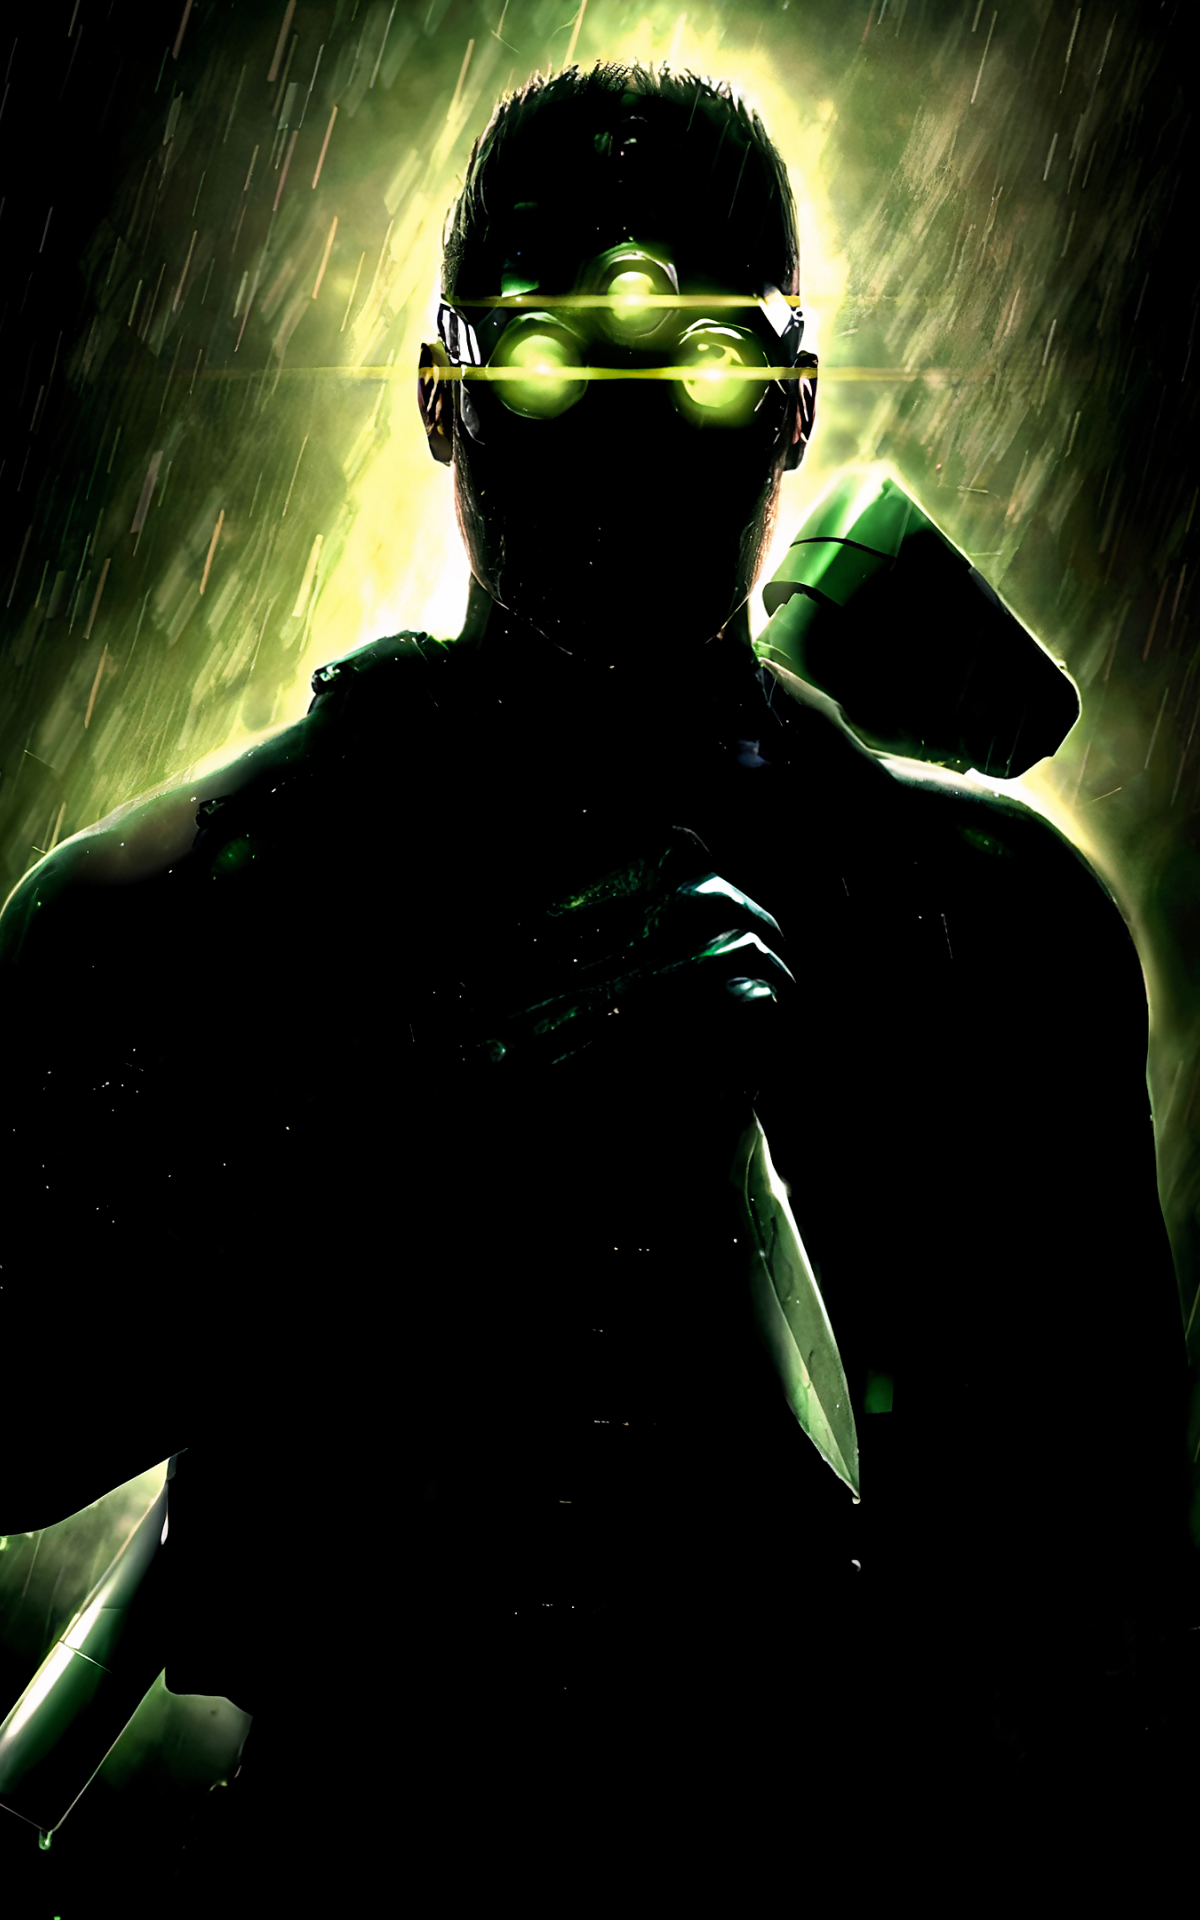 splinter cell chaos theory pc hacking